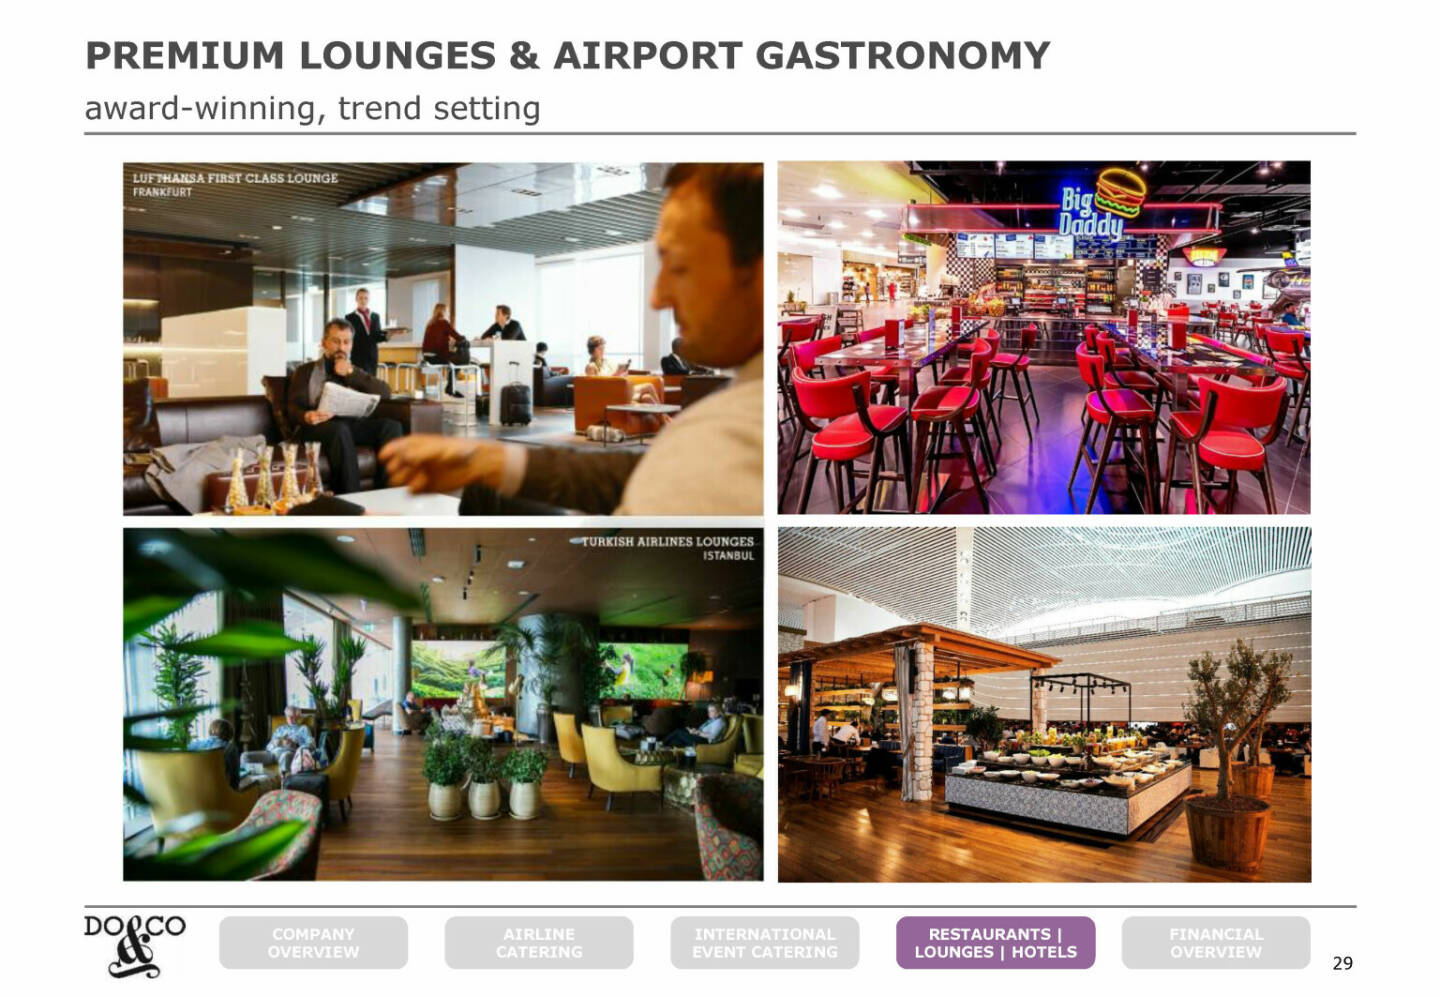 Do&Co - PREMIUM LOUNGES & AIRPORT GASTRONOMY